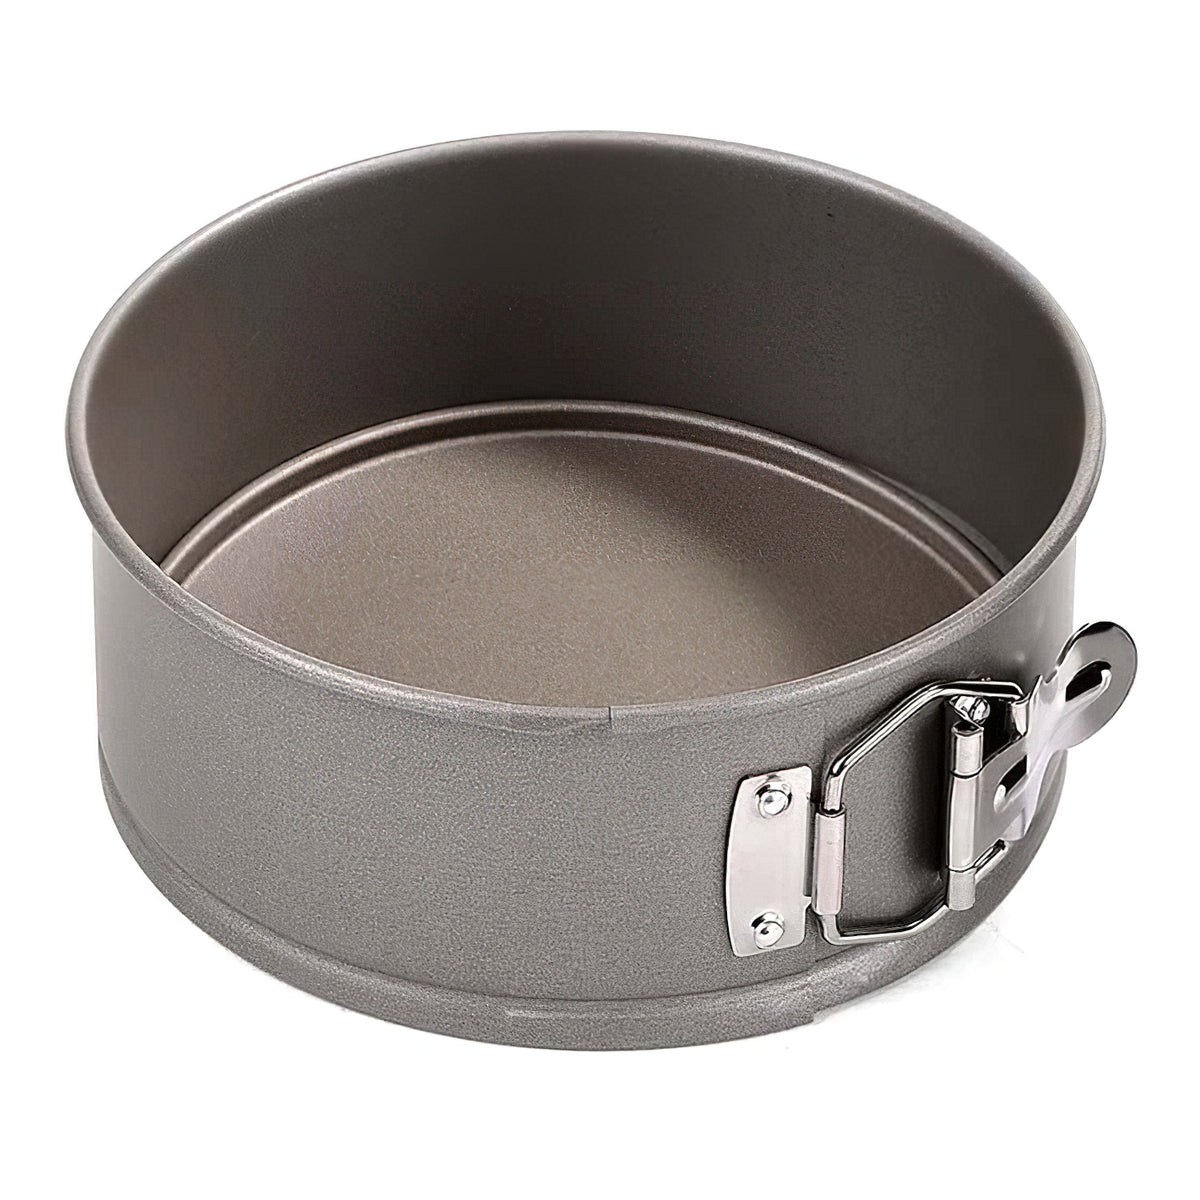 TIGERCROWN Steel Innerspring Round Cake Pan with Removable Bottom